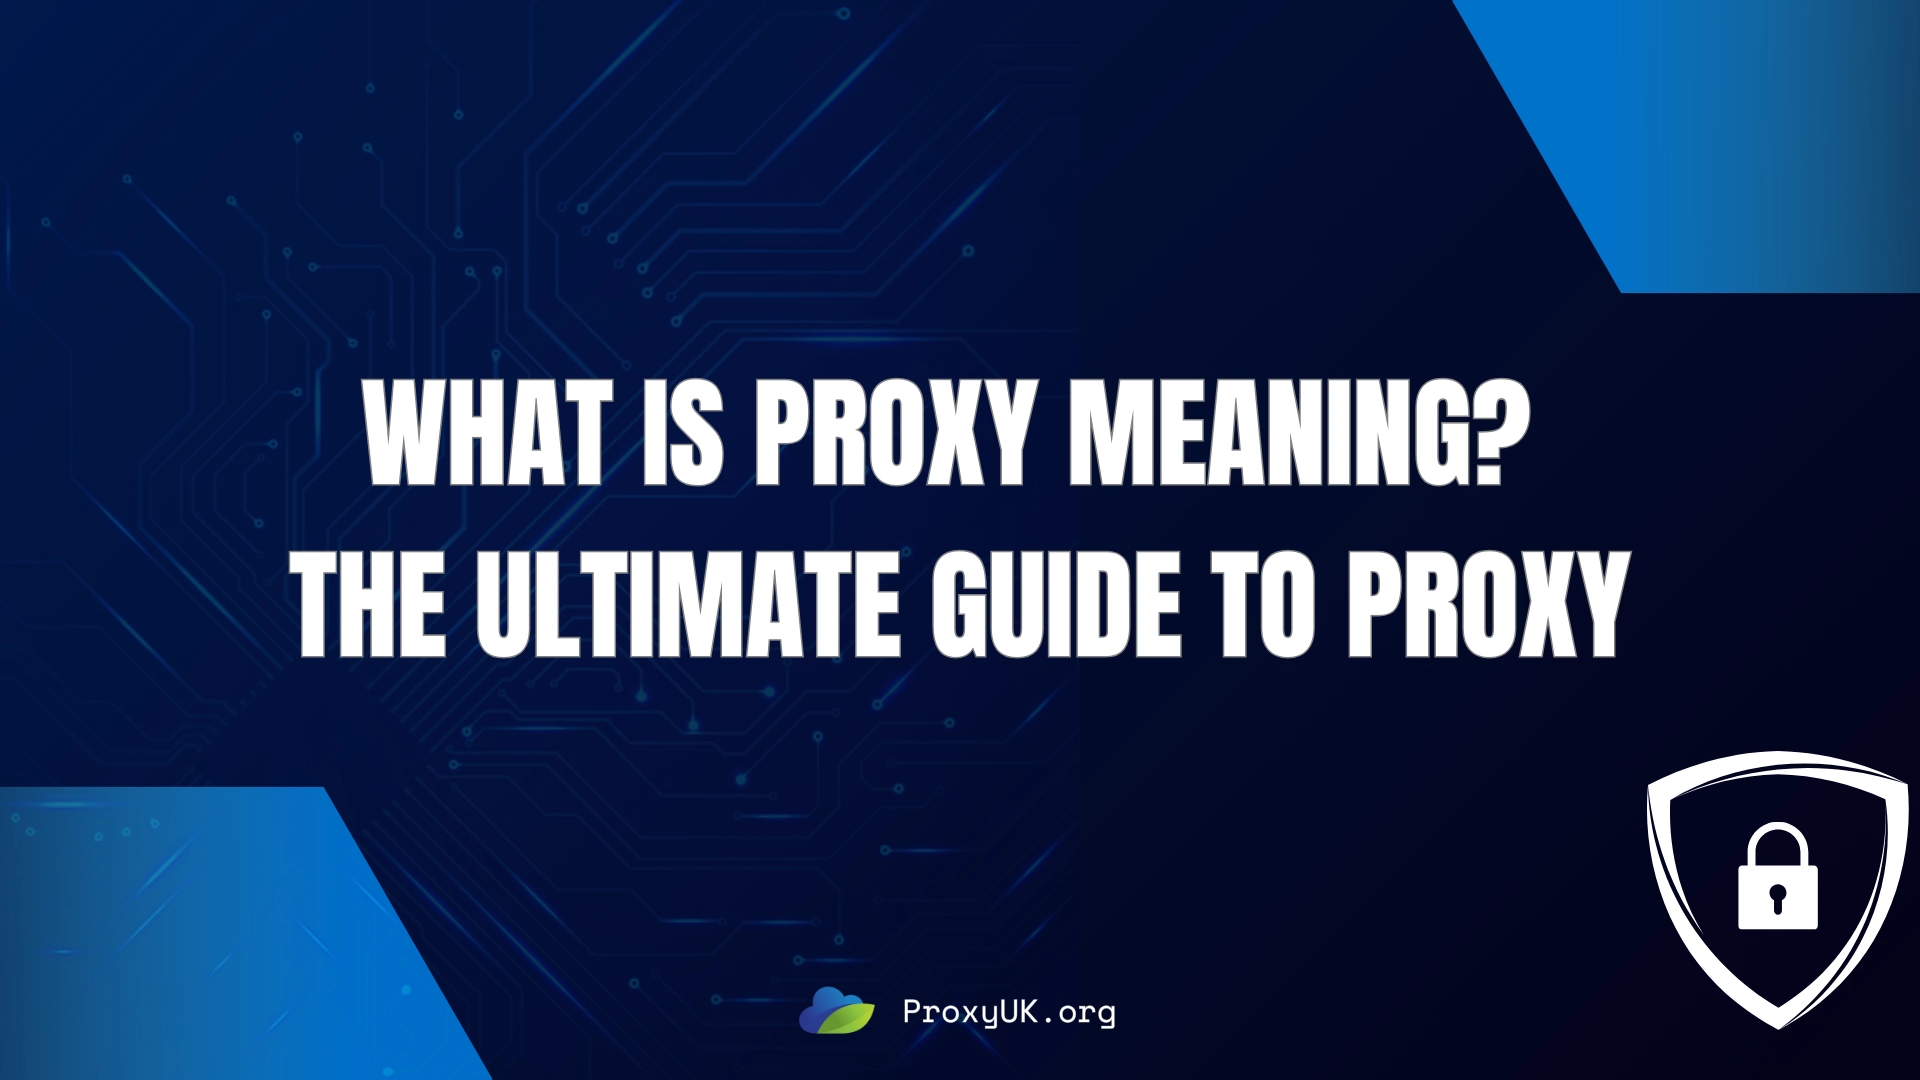 What is proxy meaning?